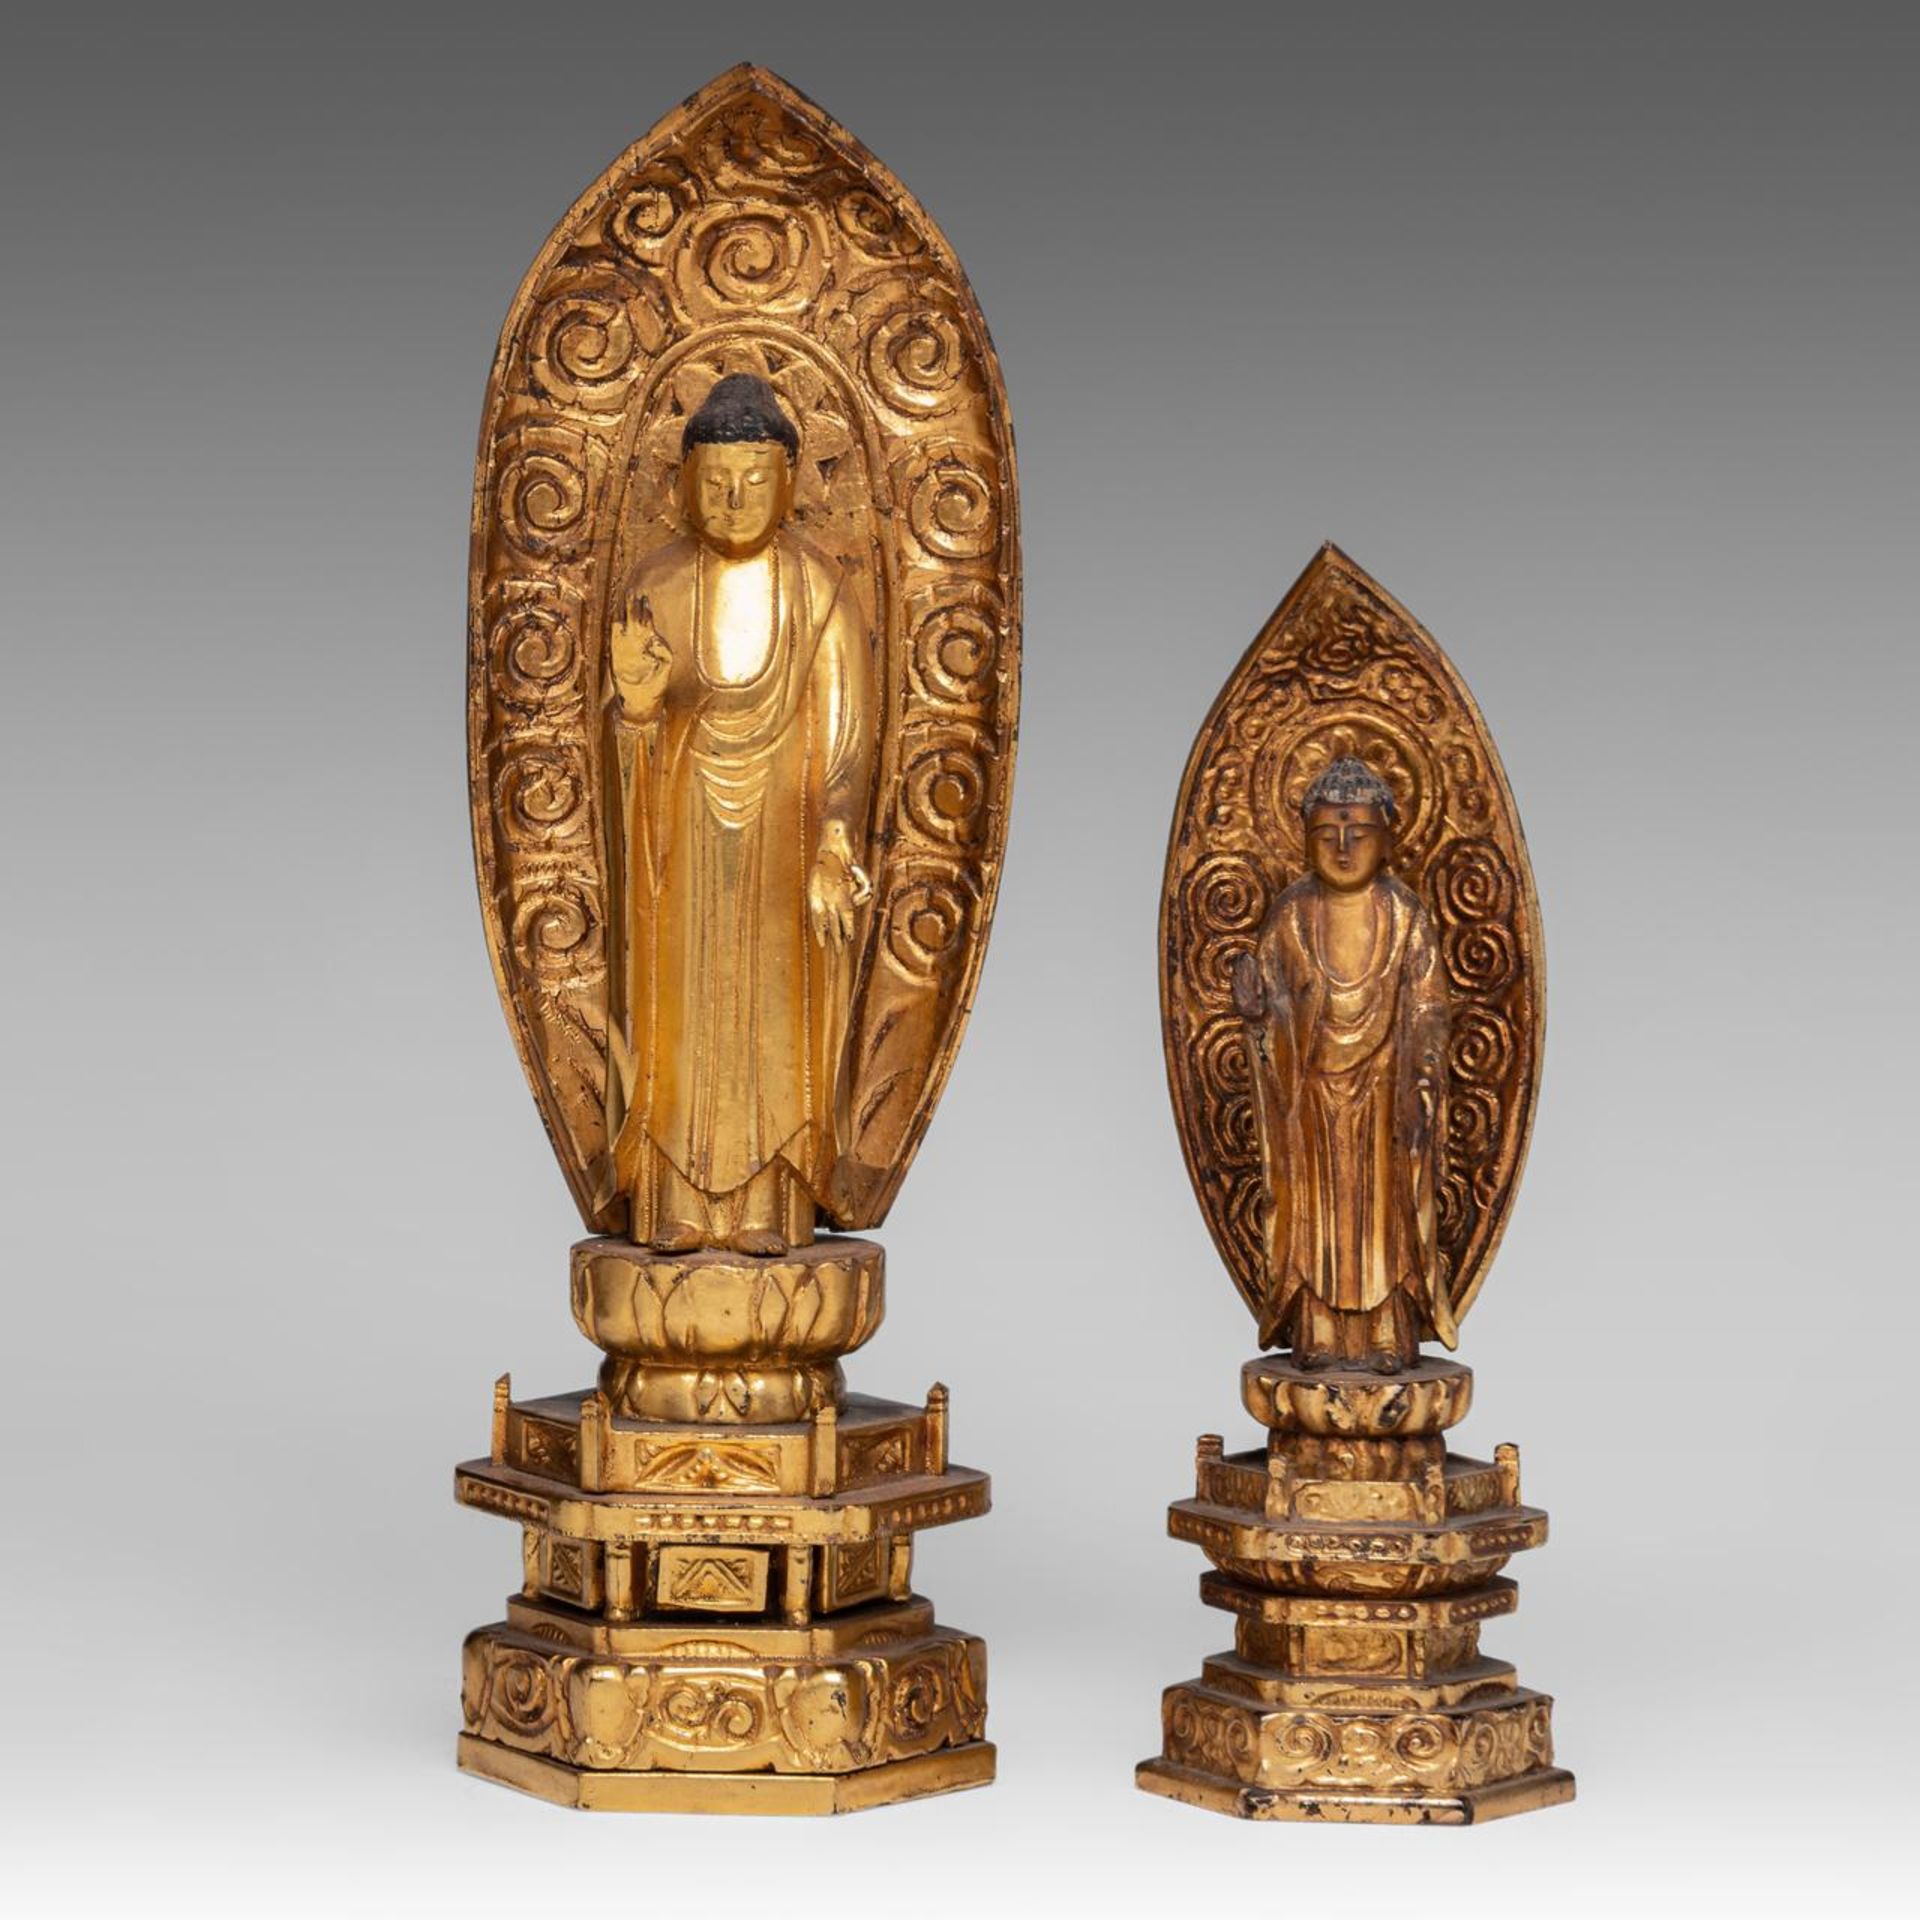 Two Japanese gilt lacquered figures of standing Buddha, late 19thC/ 20thC, H 24,5 - 33 cm